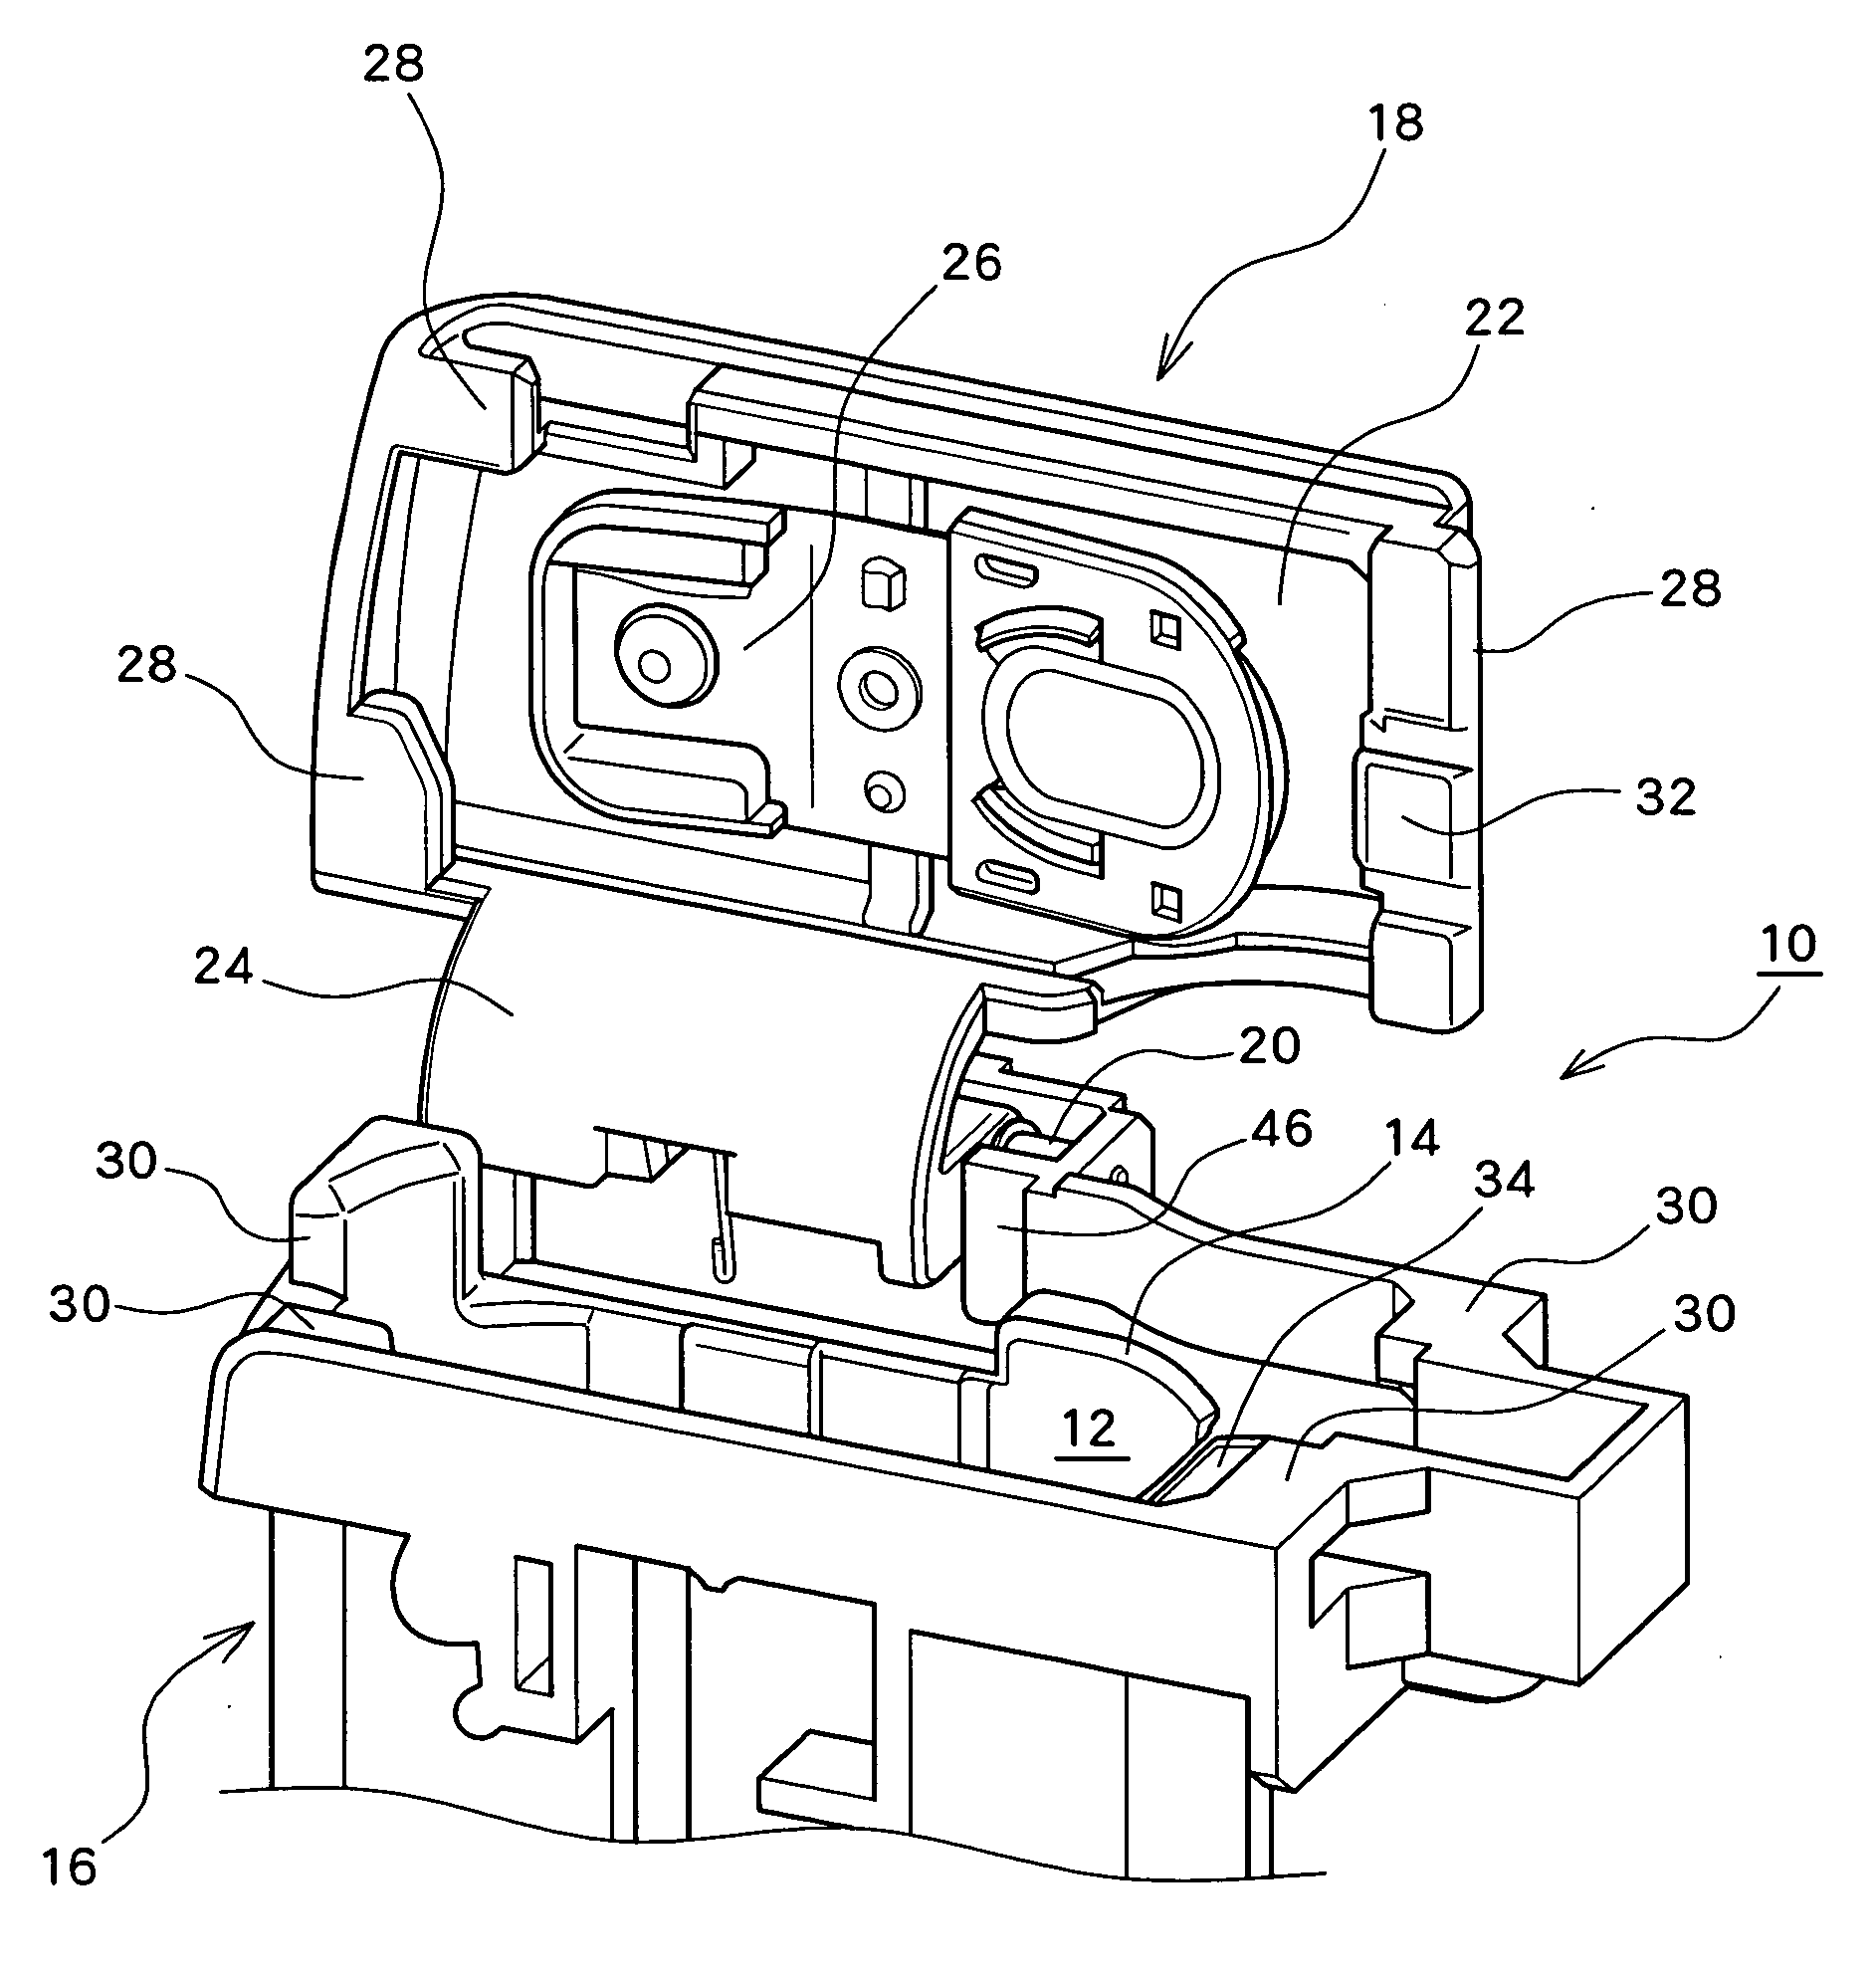 Battery housing structure